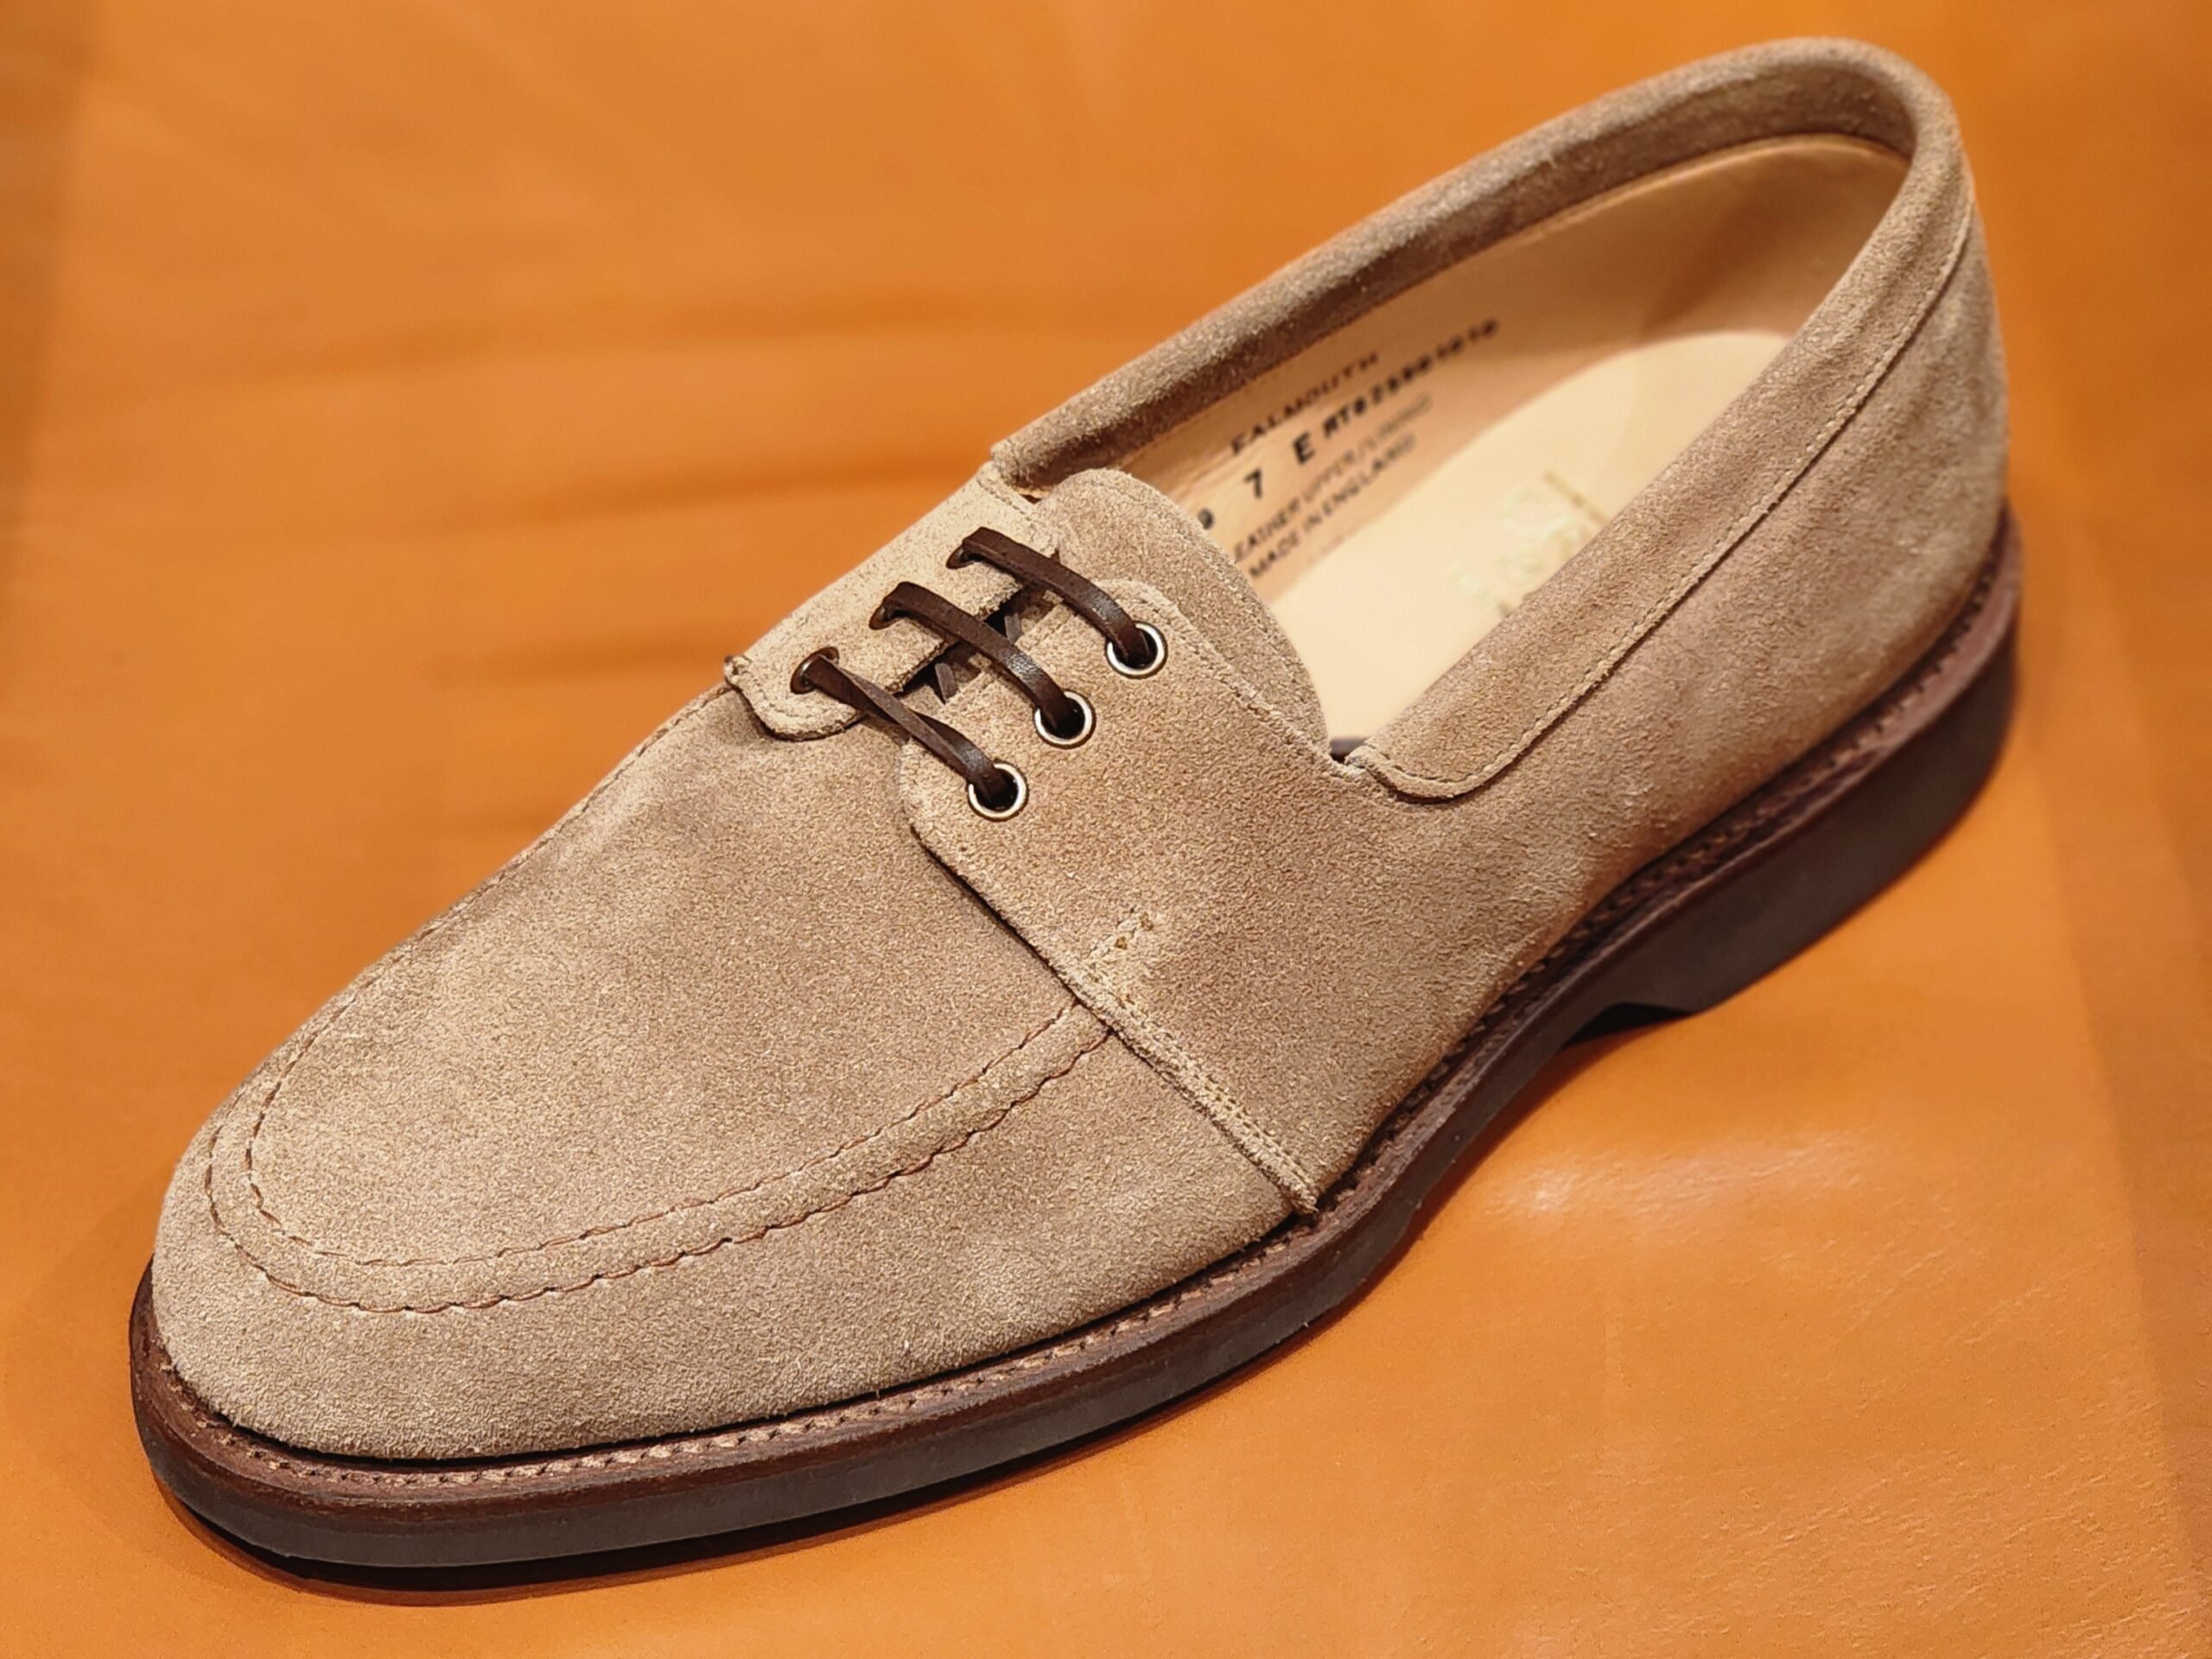 Boat Shoes: An Old Classic or Still Relevant?